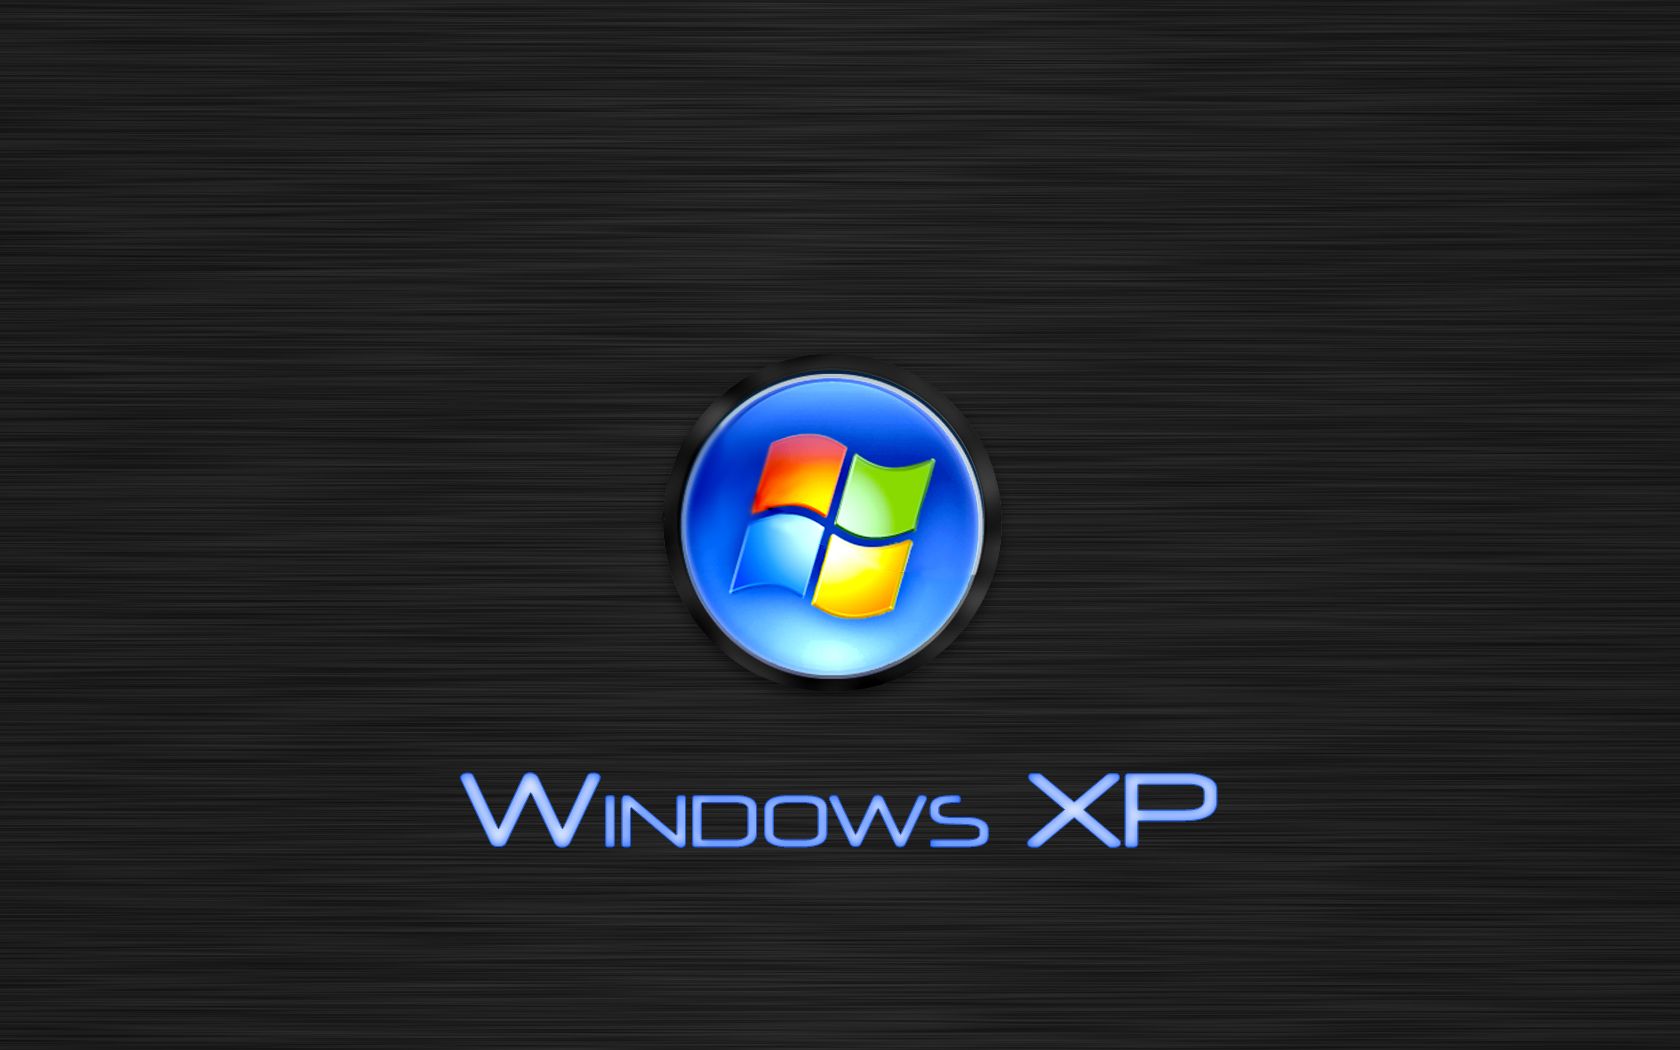 HD Wallpapers for Windows XP